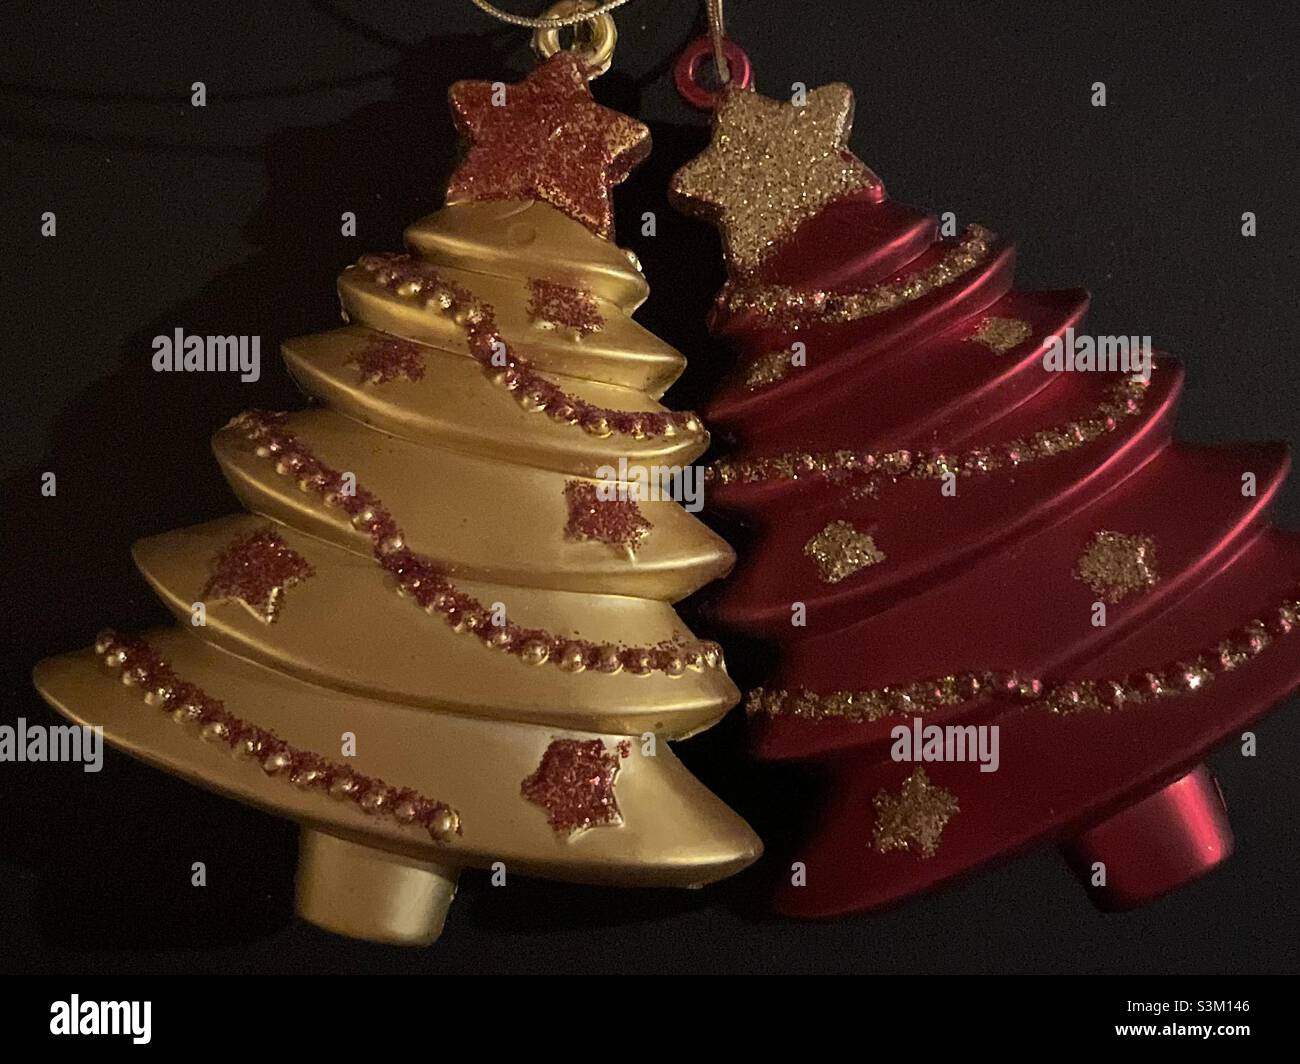 Pair of vintage plastic Christmas tree decorations- baubles from the 1980s Stock Photo